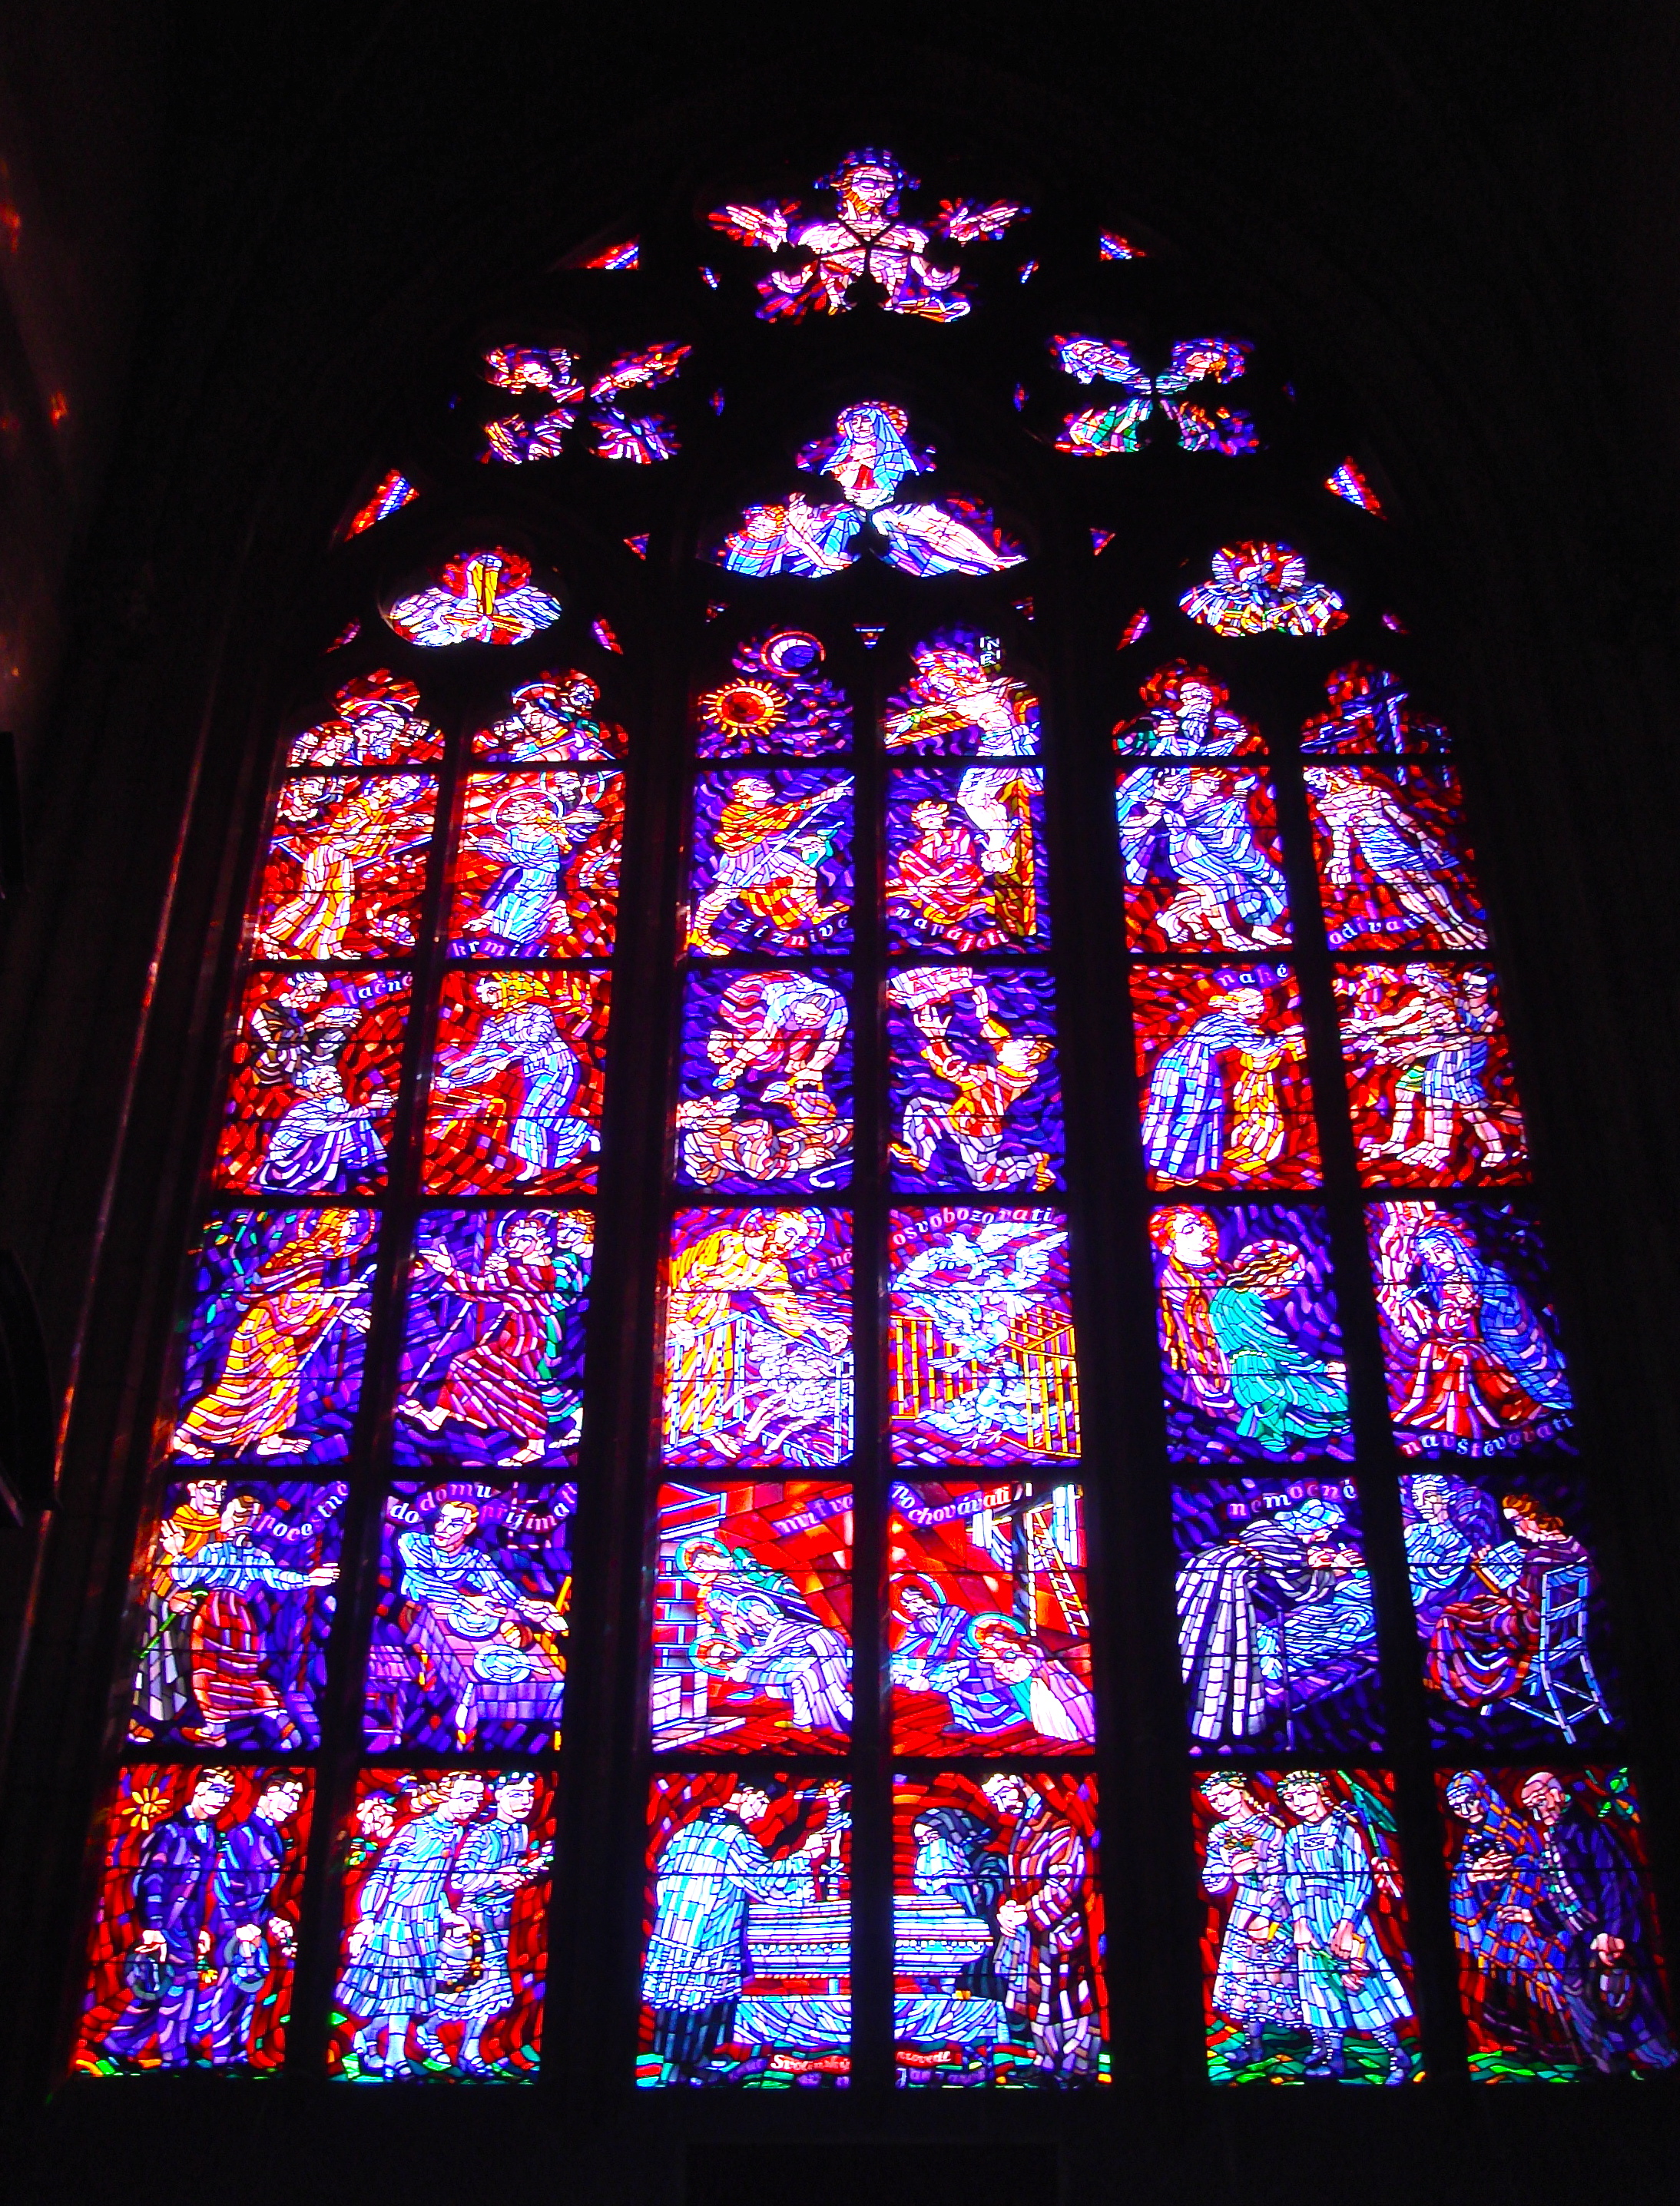 Stained Glass Windows In Prague's St Vitus Cathedral